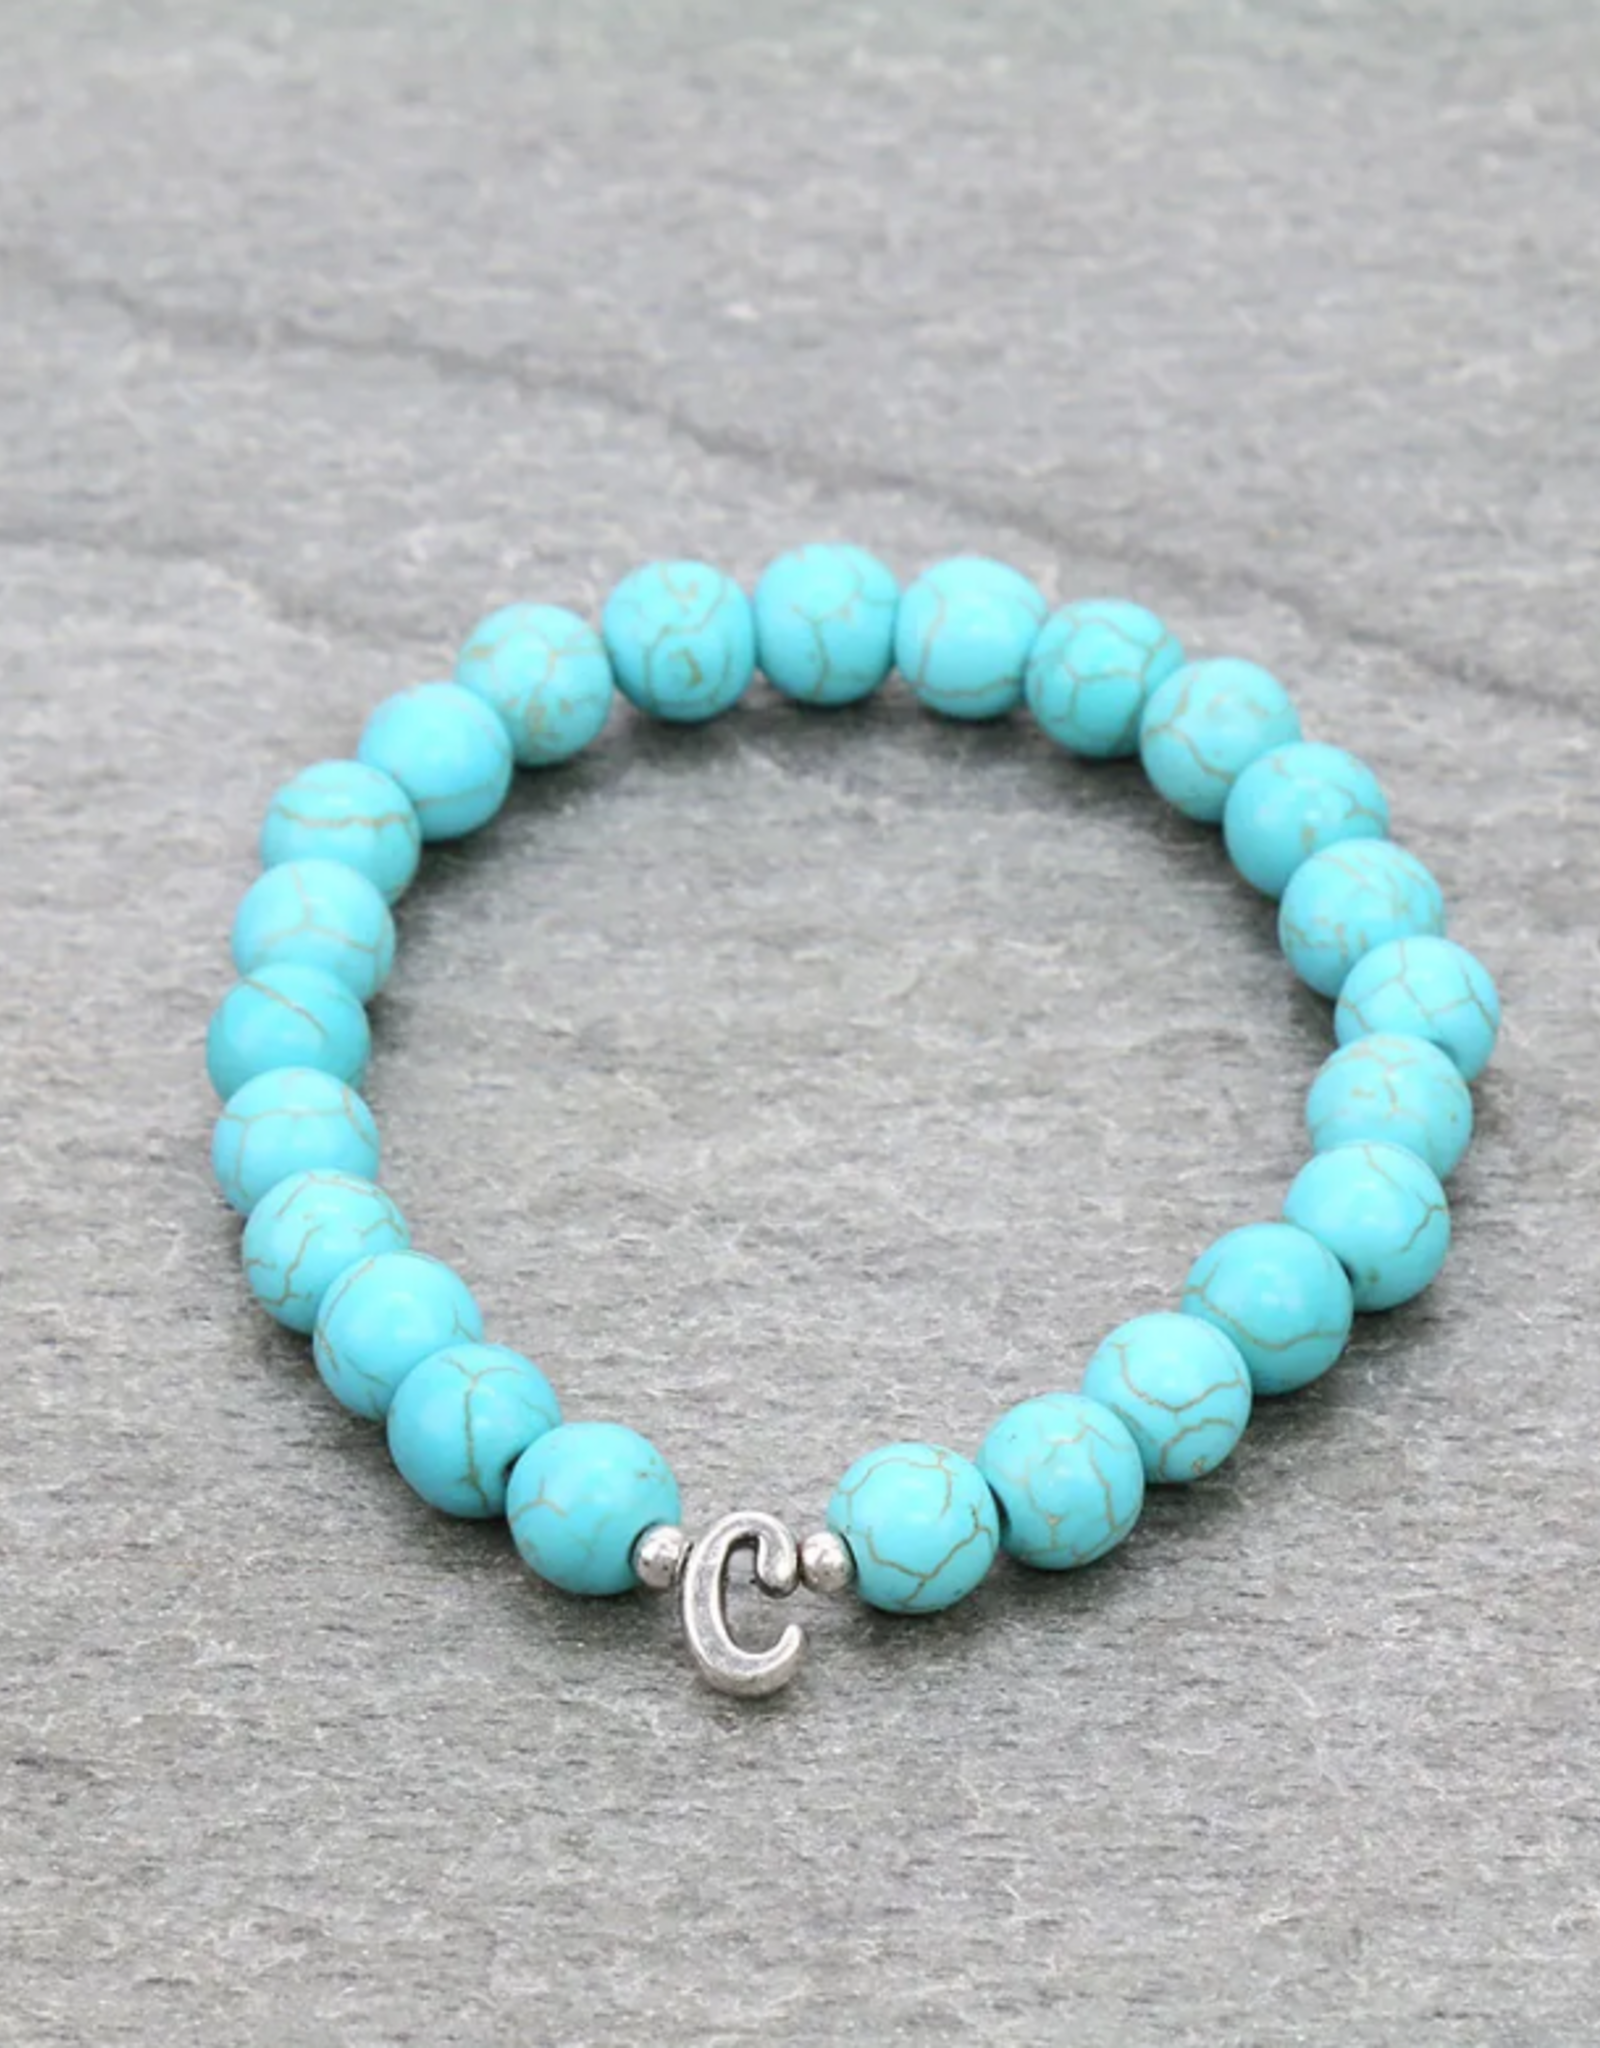 BRACELET LOWERCASE LETTER STRETCH W/TURQUOISE BEADS